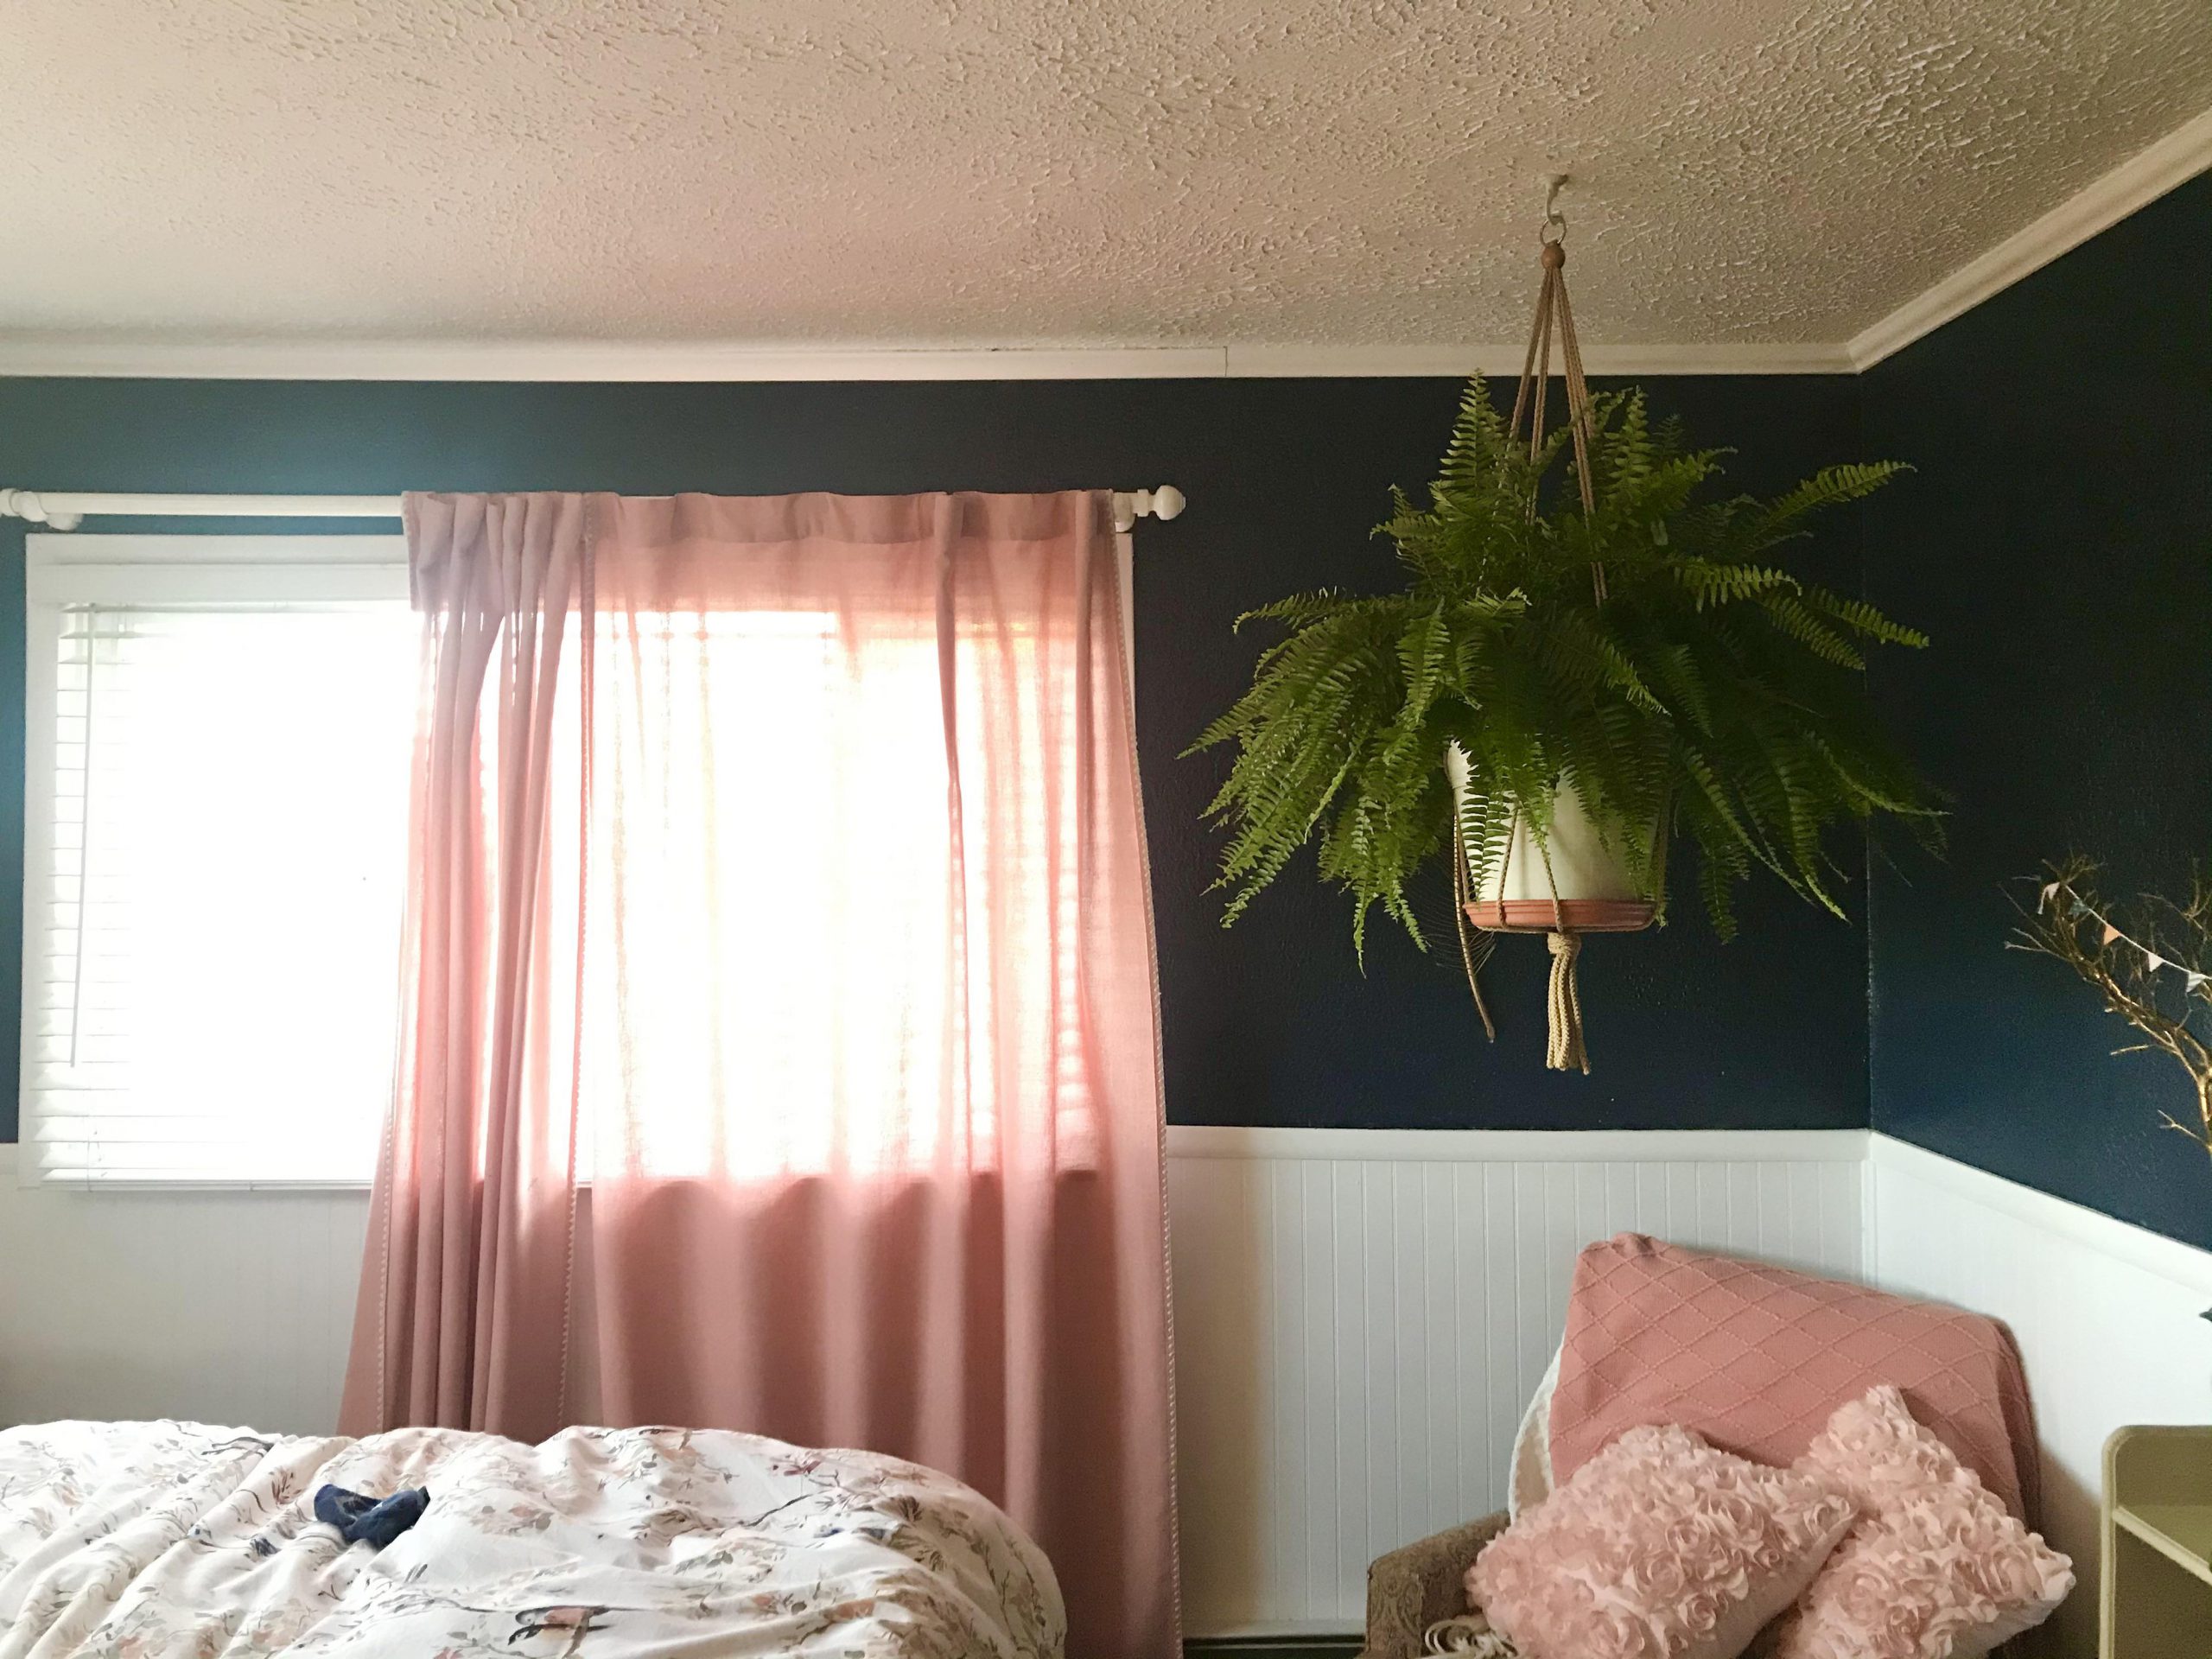 boston fern plant is hanging on the corner of the bedroom